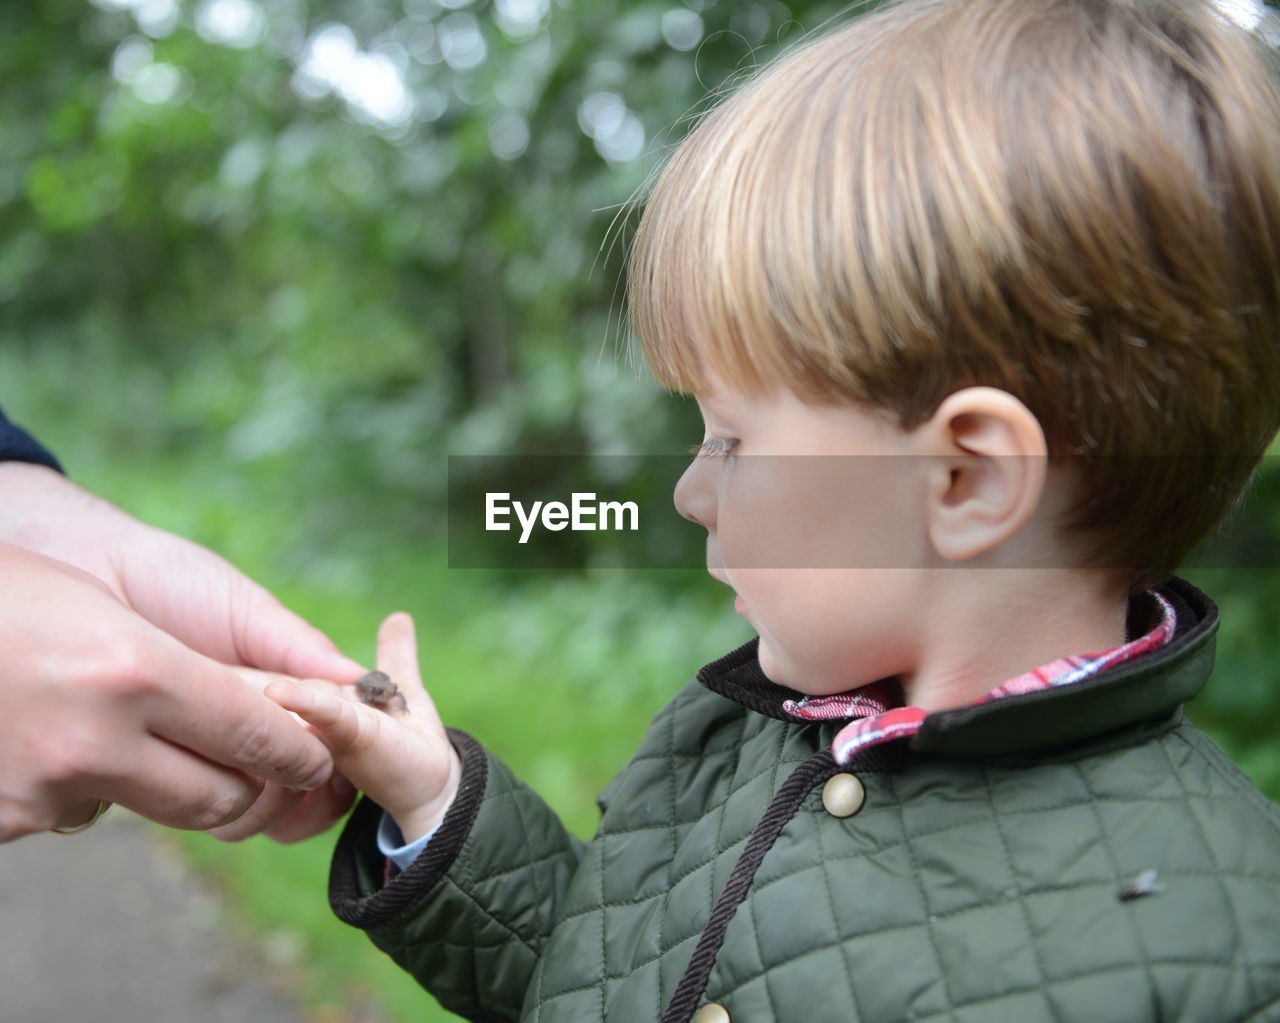 Cropped image of hand person holding hand of boy with frog against plants